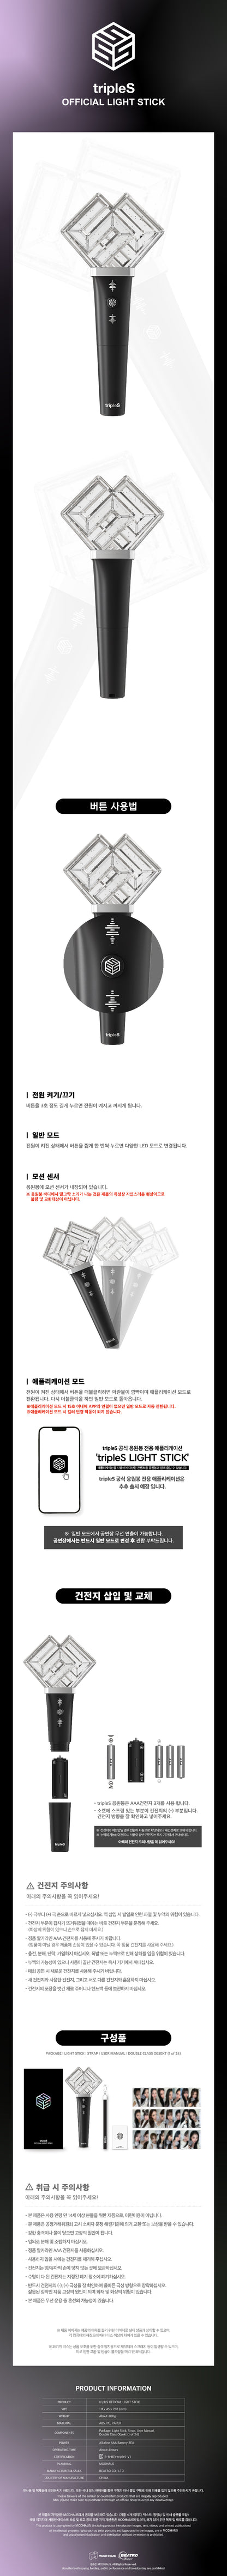 [PREORDER] TRIPLES - OFFICIAL LIGHT STICK